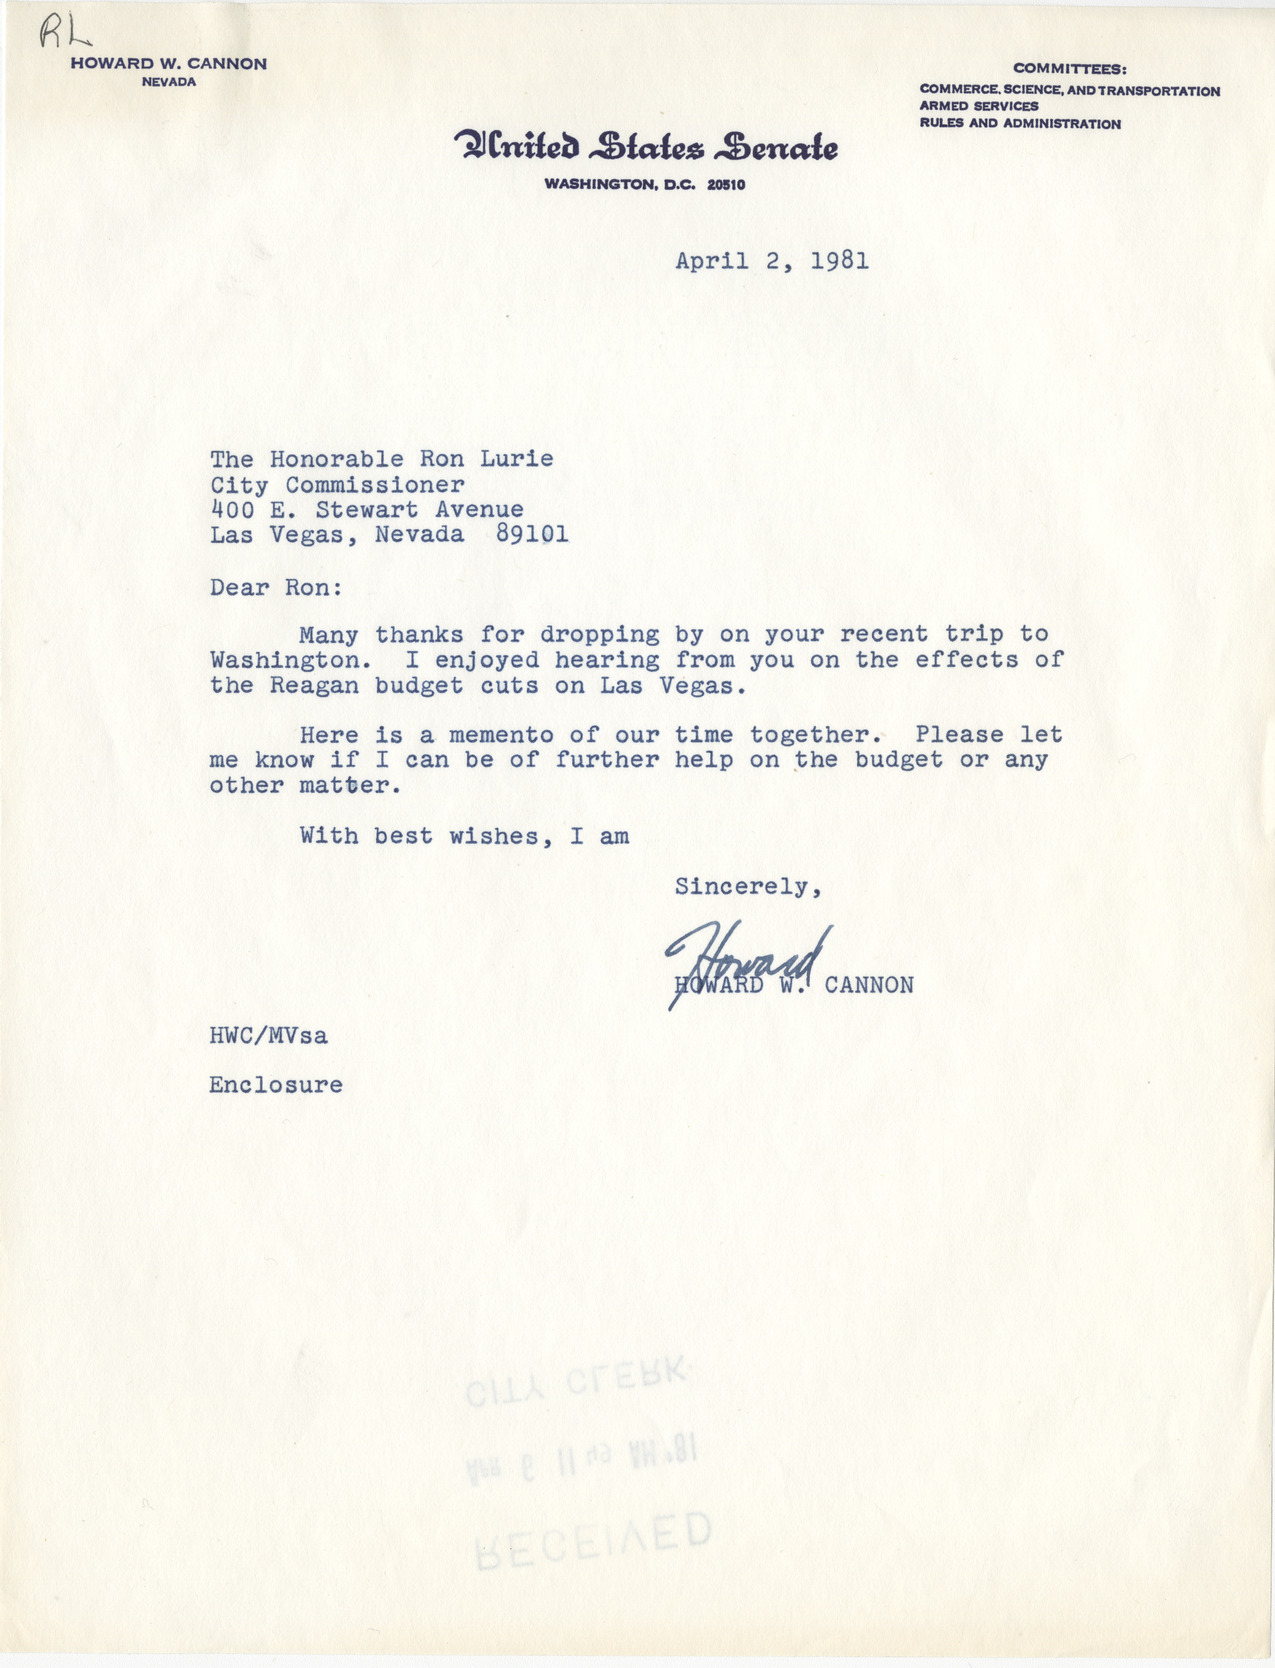 Letter from Howard Cannon to Ron Lurie, April 2, 1981